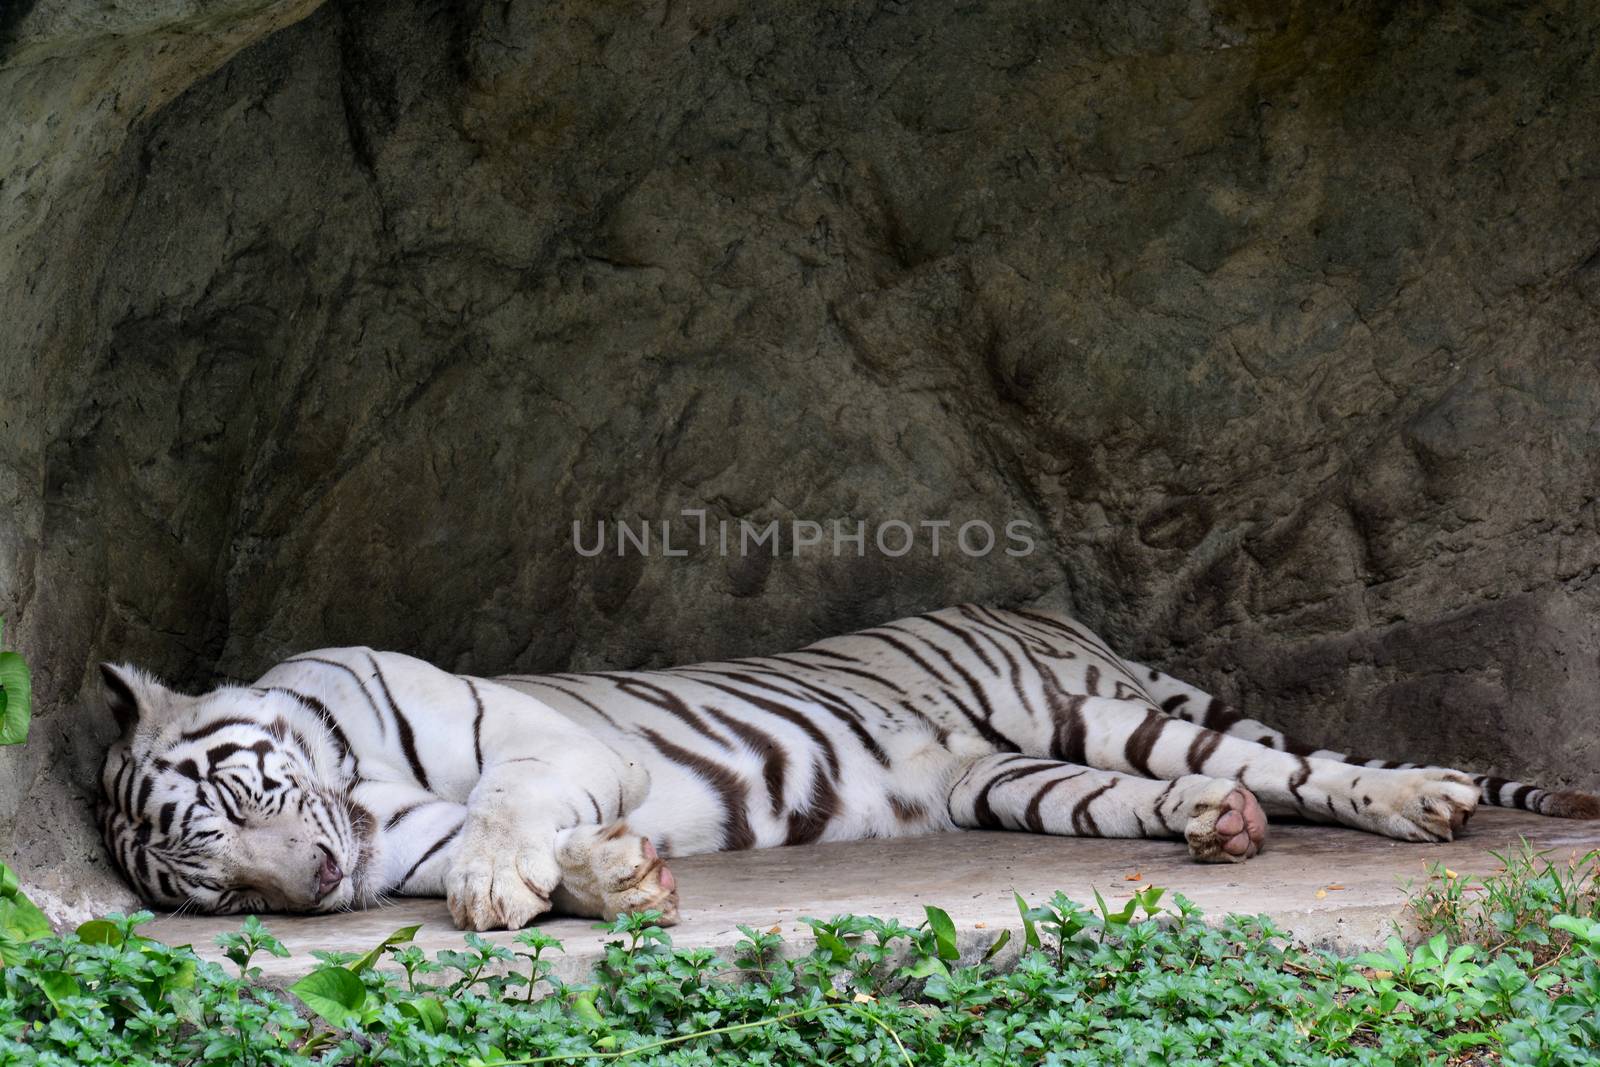 White tiger or White tiger sleeping by ideation90